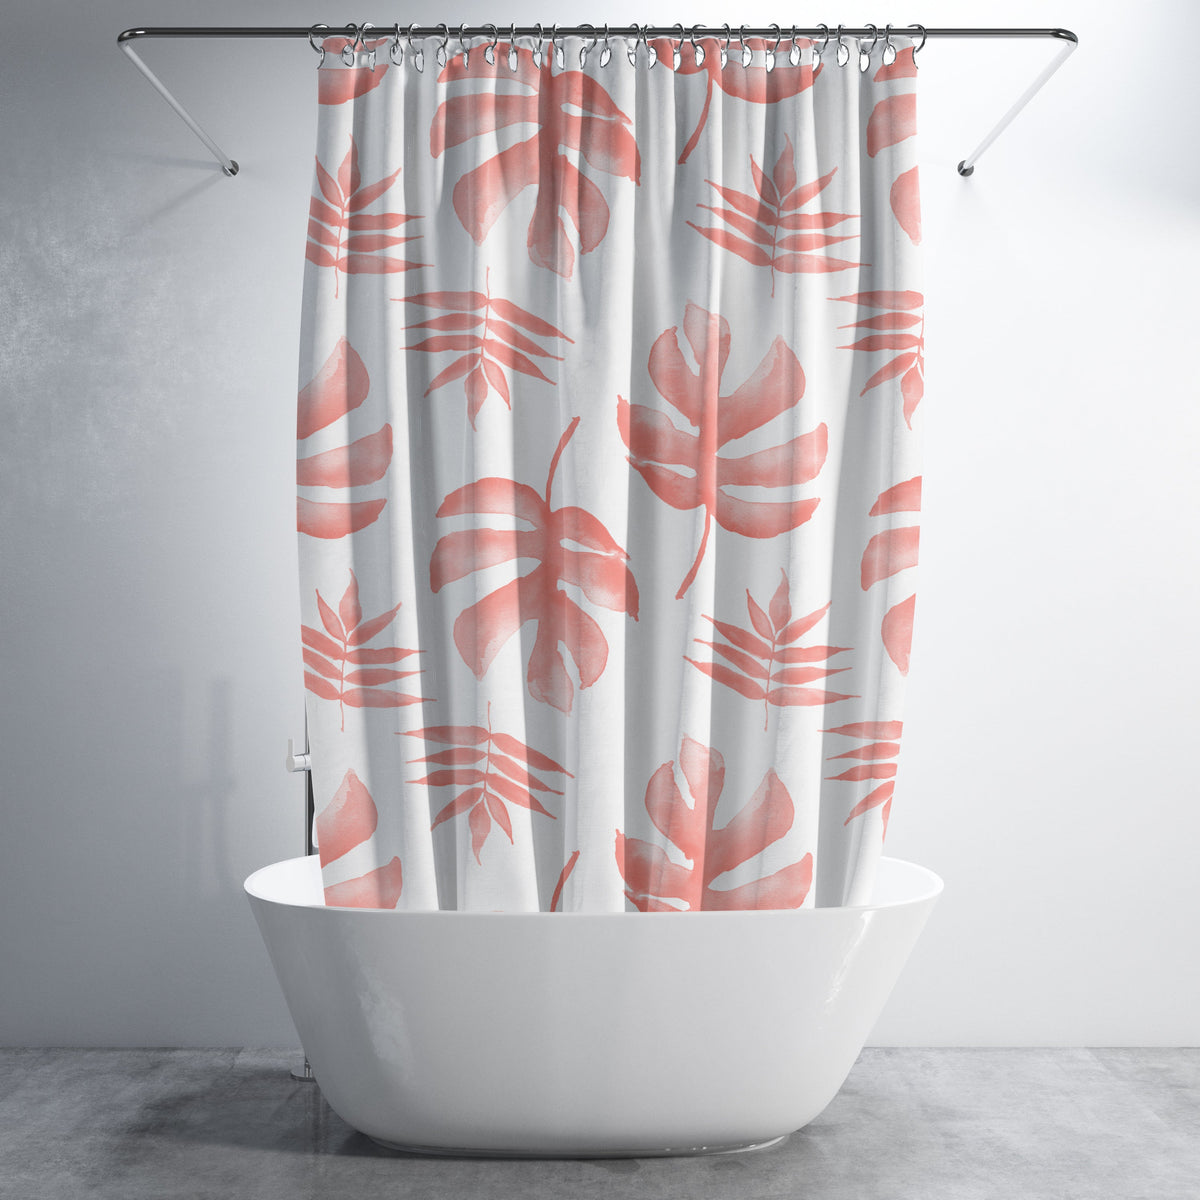 The Shower Panel - Palm Beachy Coral Bath, Shower Panel MWW 